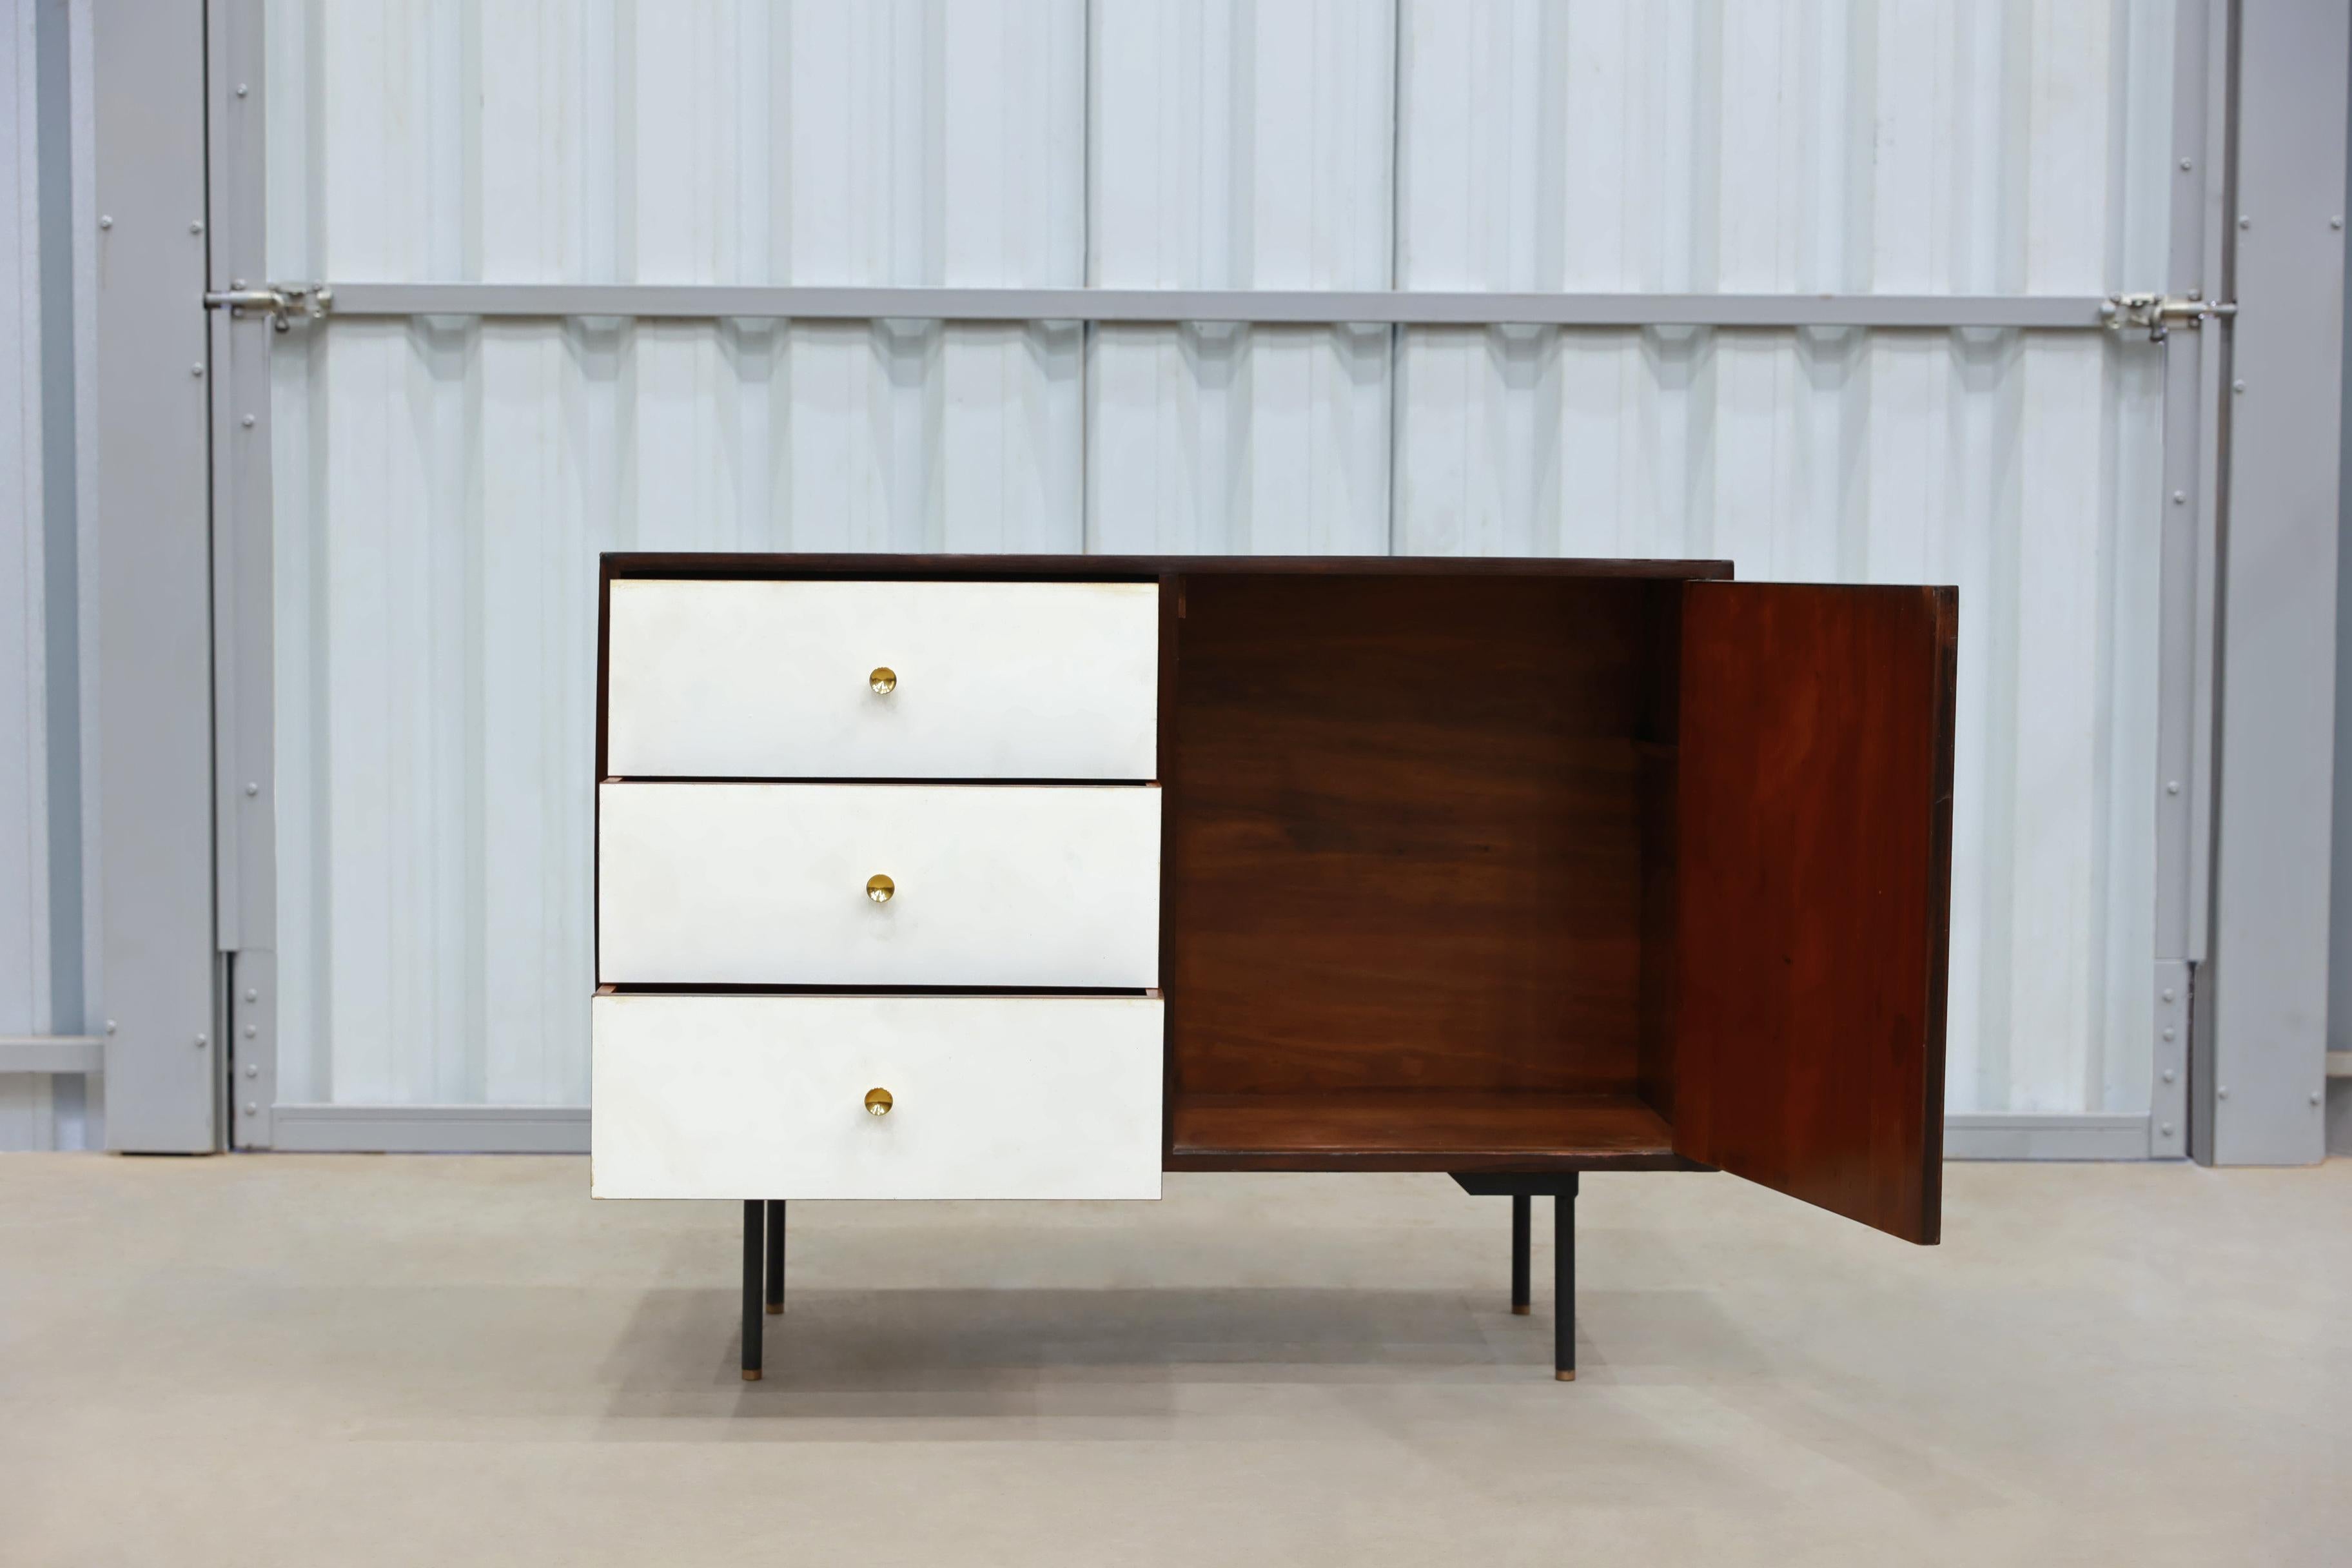 Size: H 30 x W 41 x 16”

This sleek sideboard was designed by Geraldo de Barros during his time at Unilabor. This piece showcases many of Barros’ designs characteristics such as the use of Brazilian Rosewood (Jacaranda), formica, and brass details